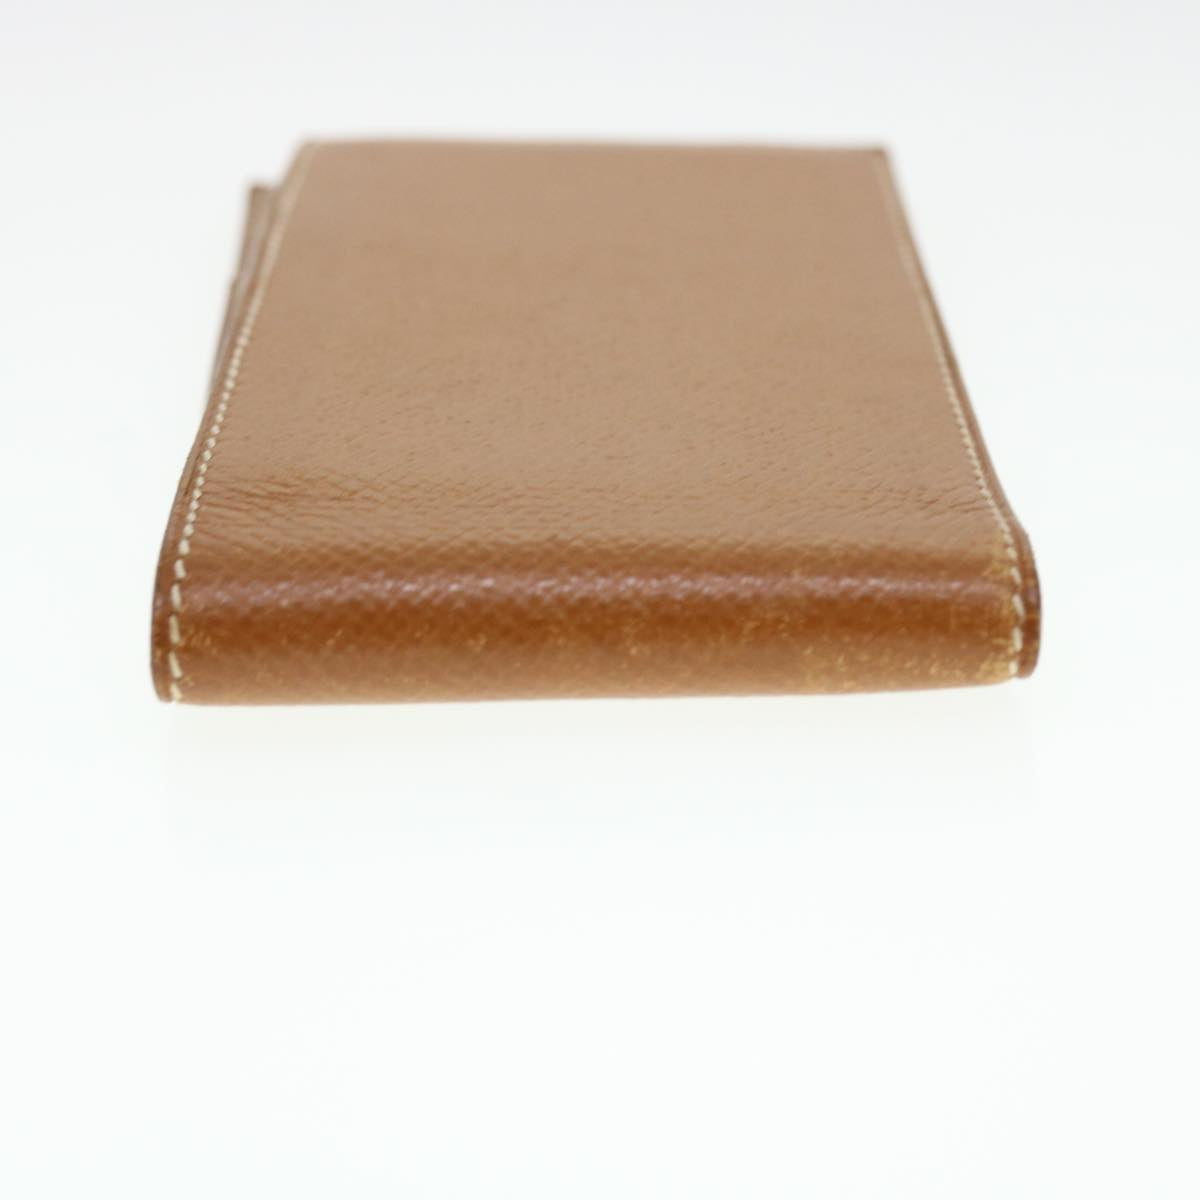 HERMES Memo Holder Day Planner Cover Leather Brown Auth ar9271B